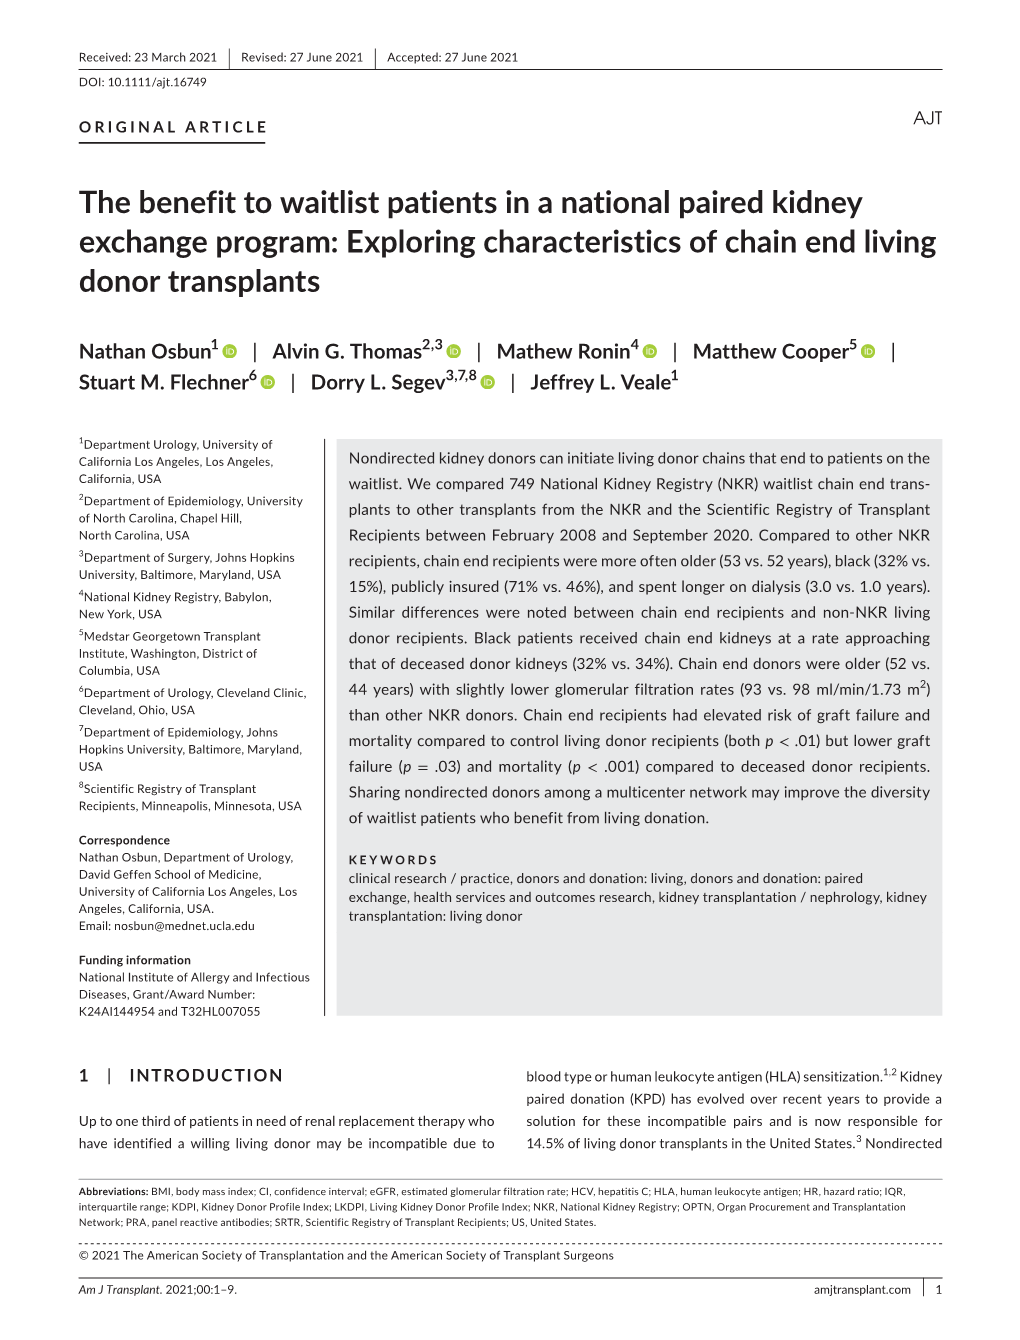 The Benefit to Waitlist Patients in a National Paired Kidney Exchange Program: Exploring Characteristics of Chain End Living Donor Transplants